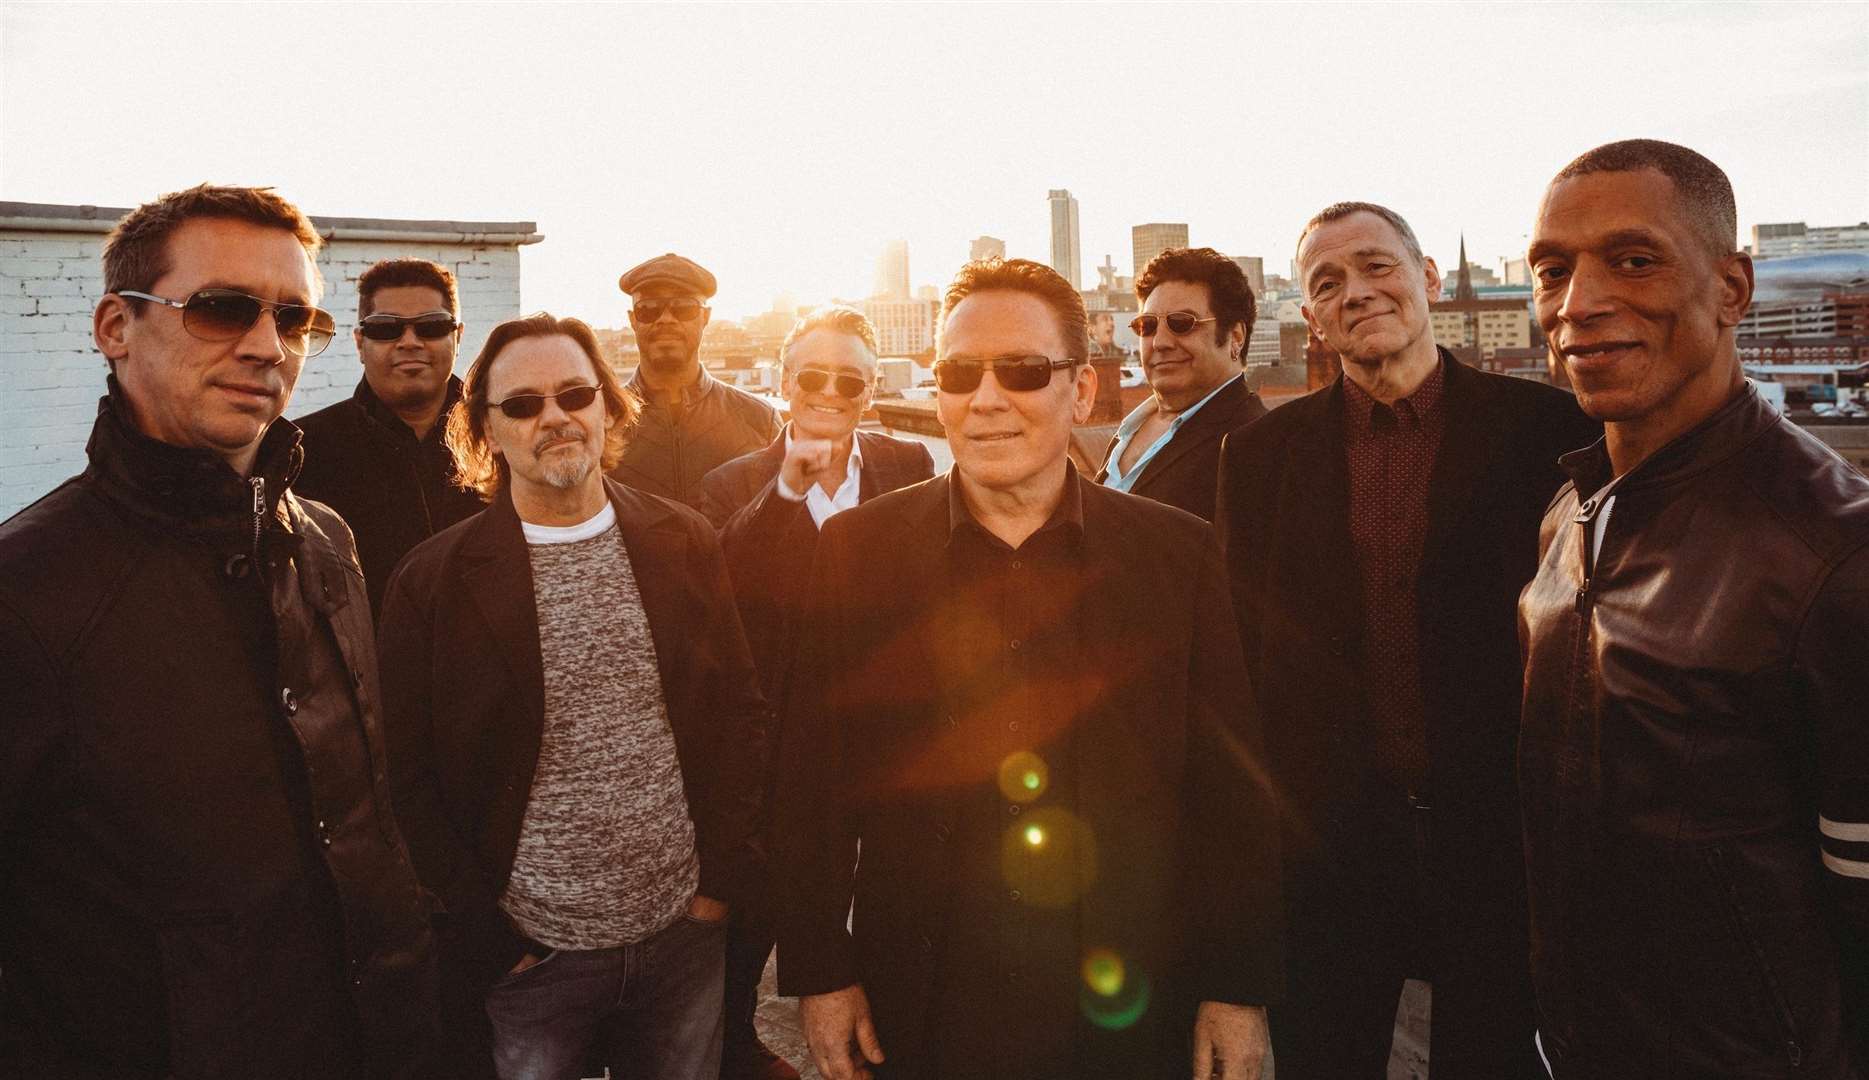 Members of UB40 will be performing at this year's Castle Concerts